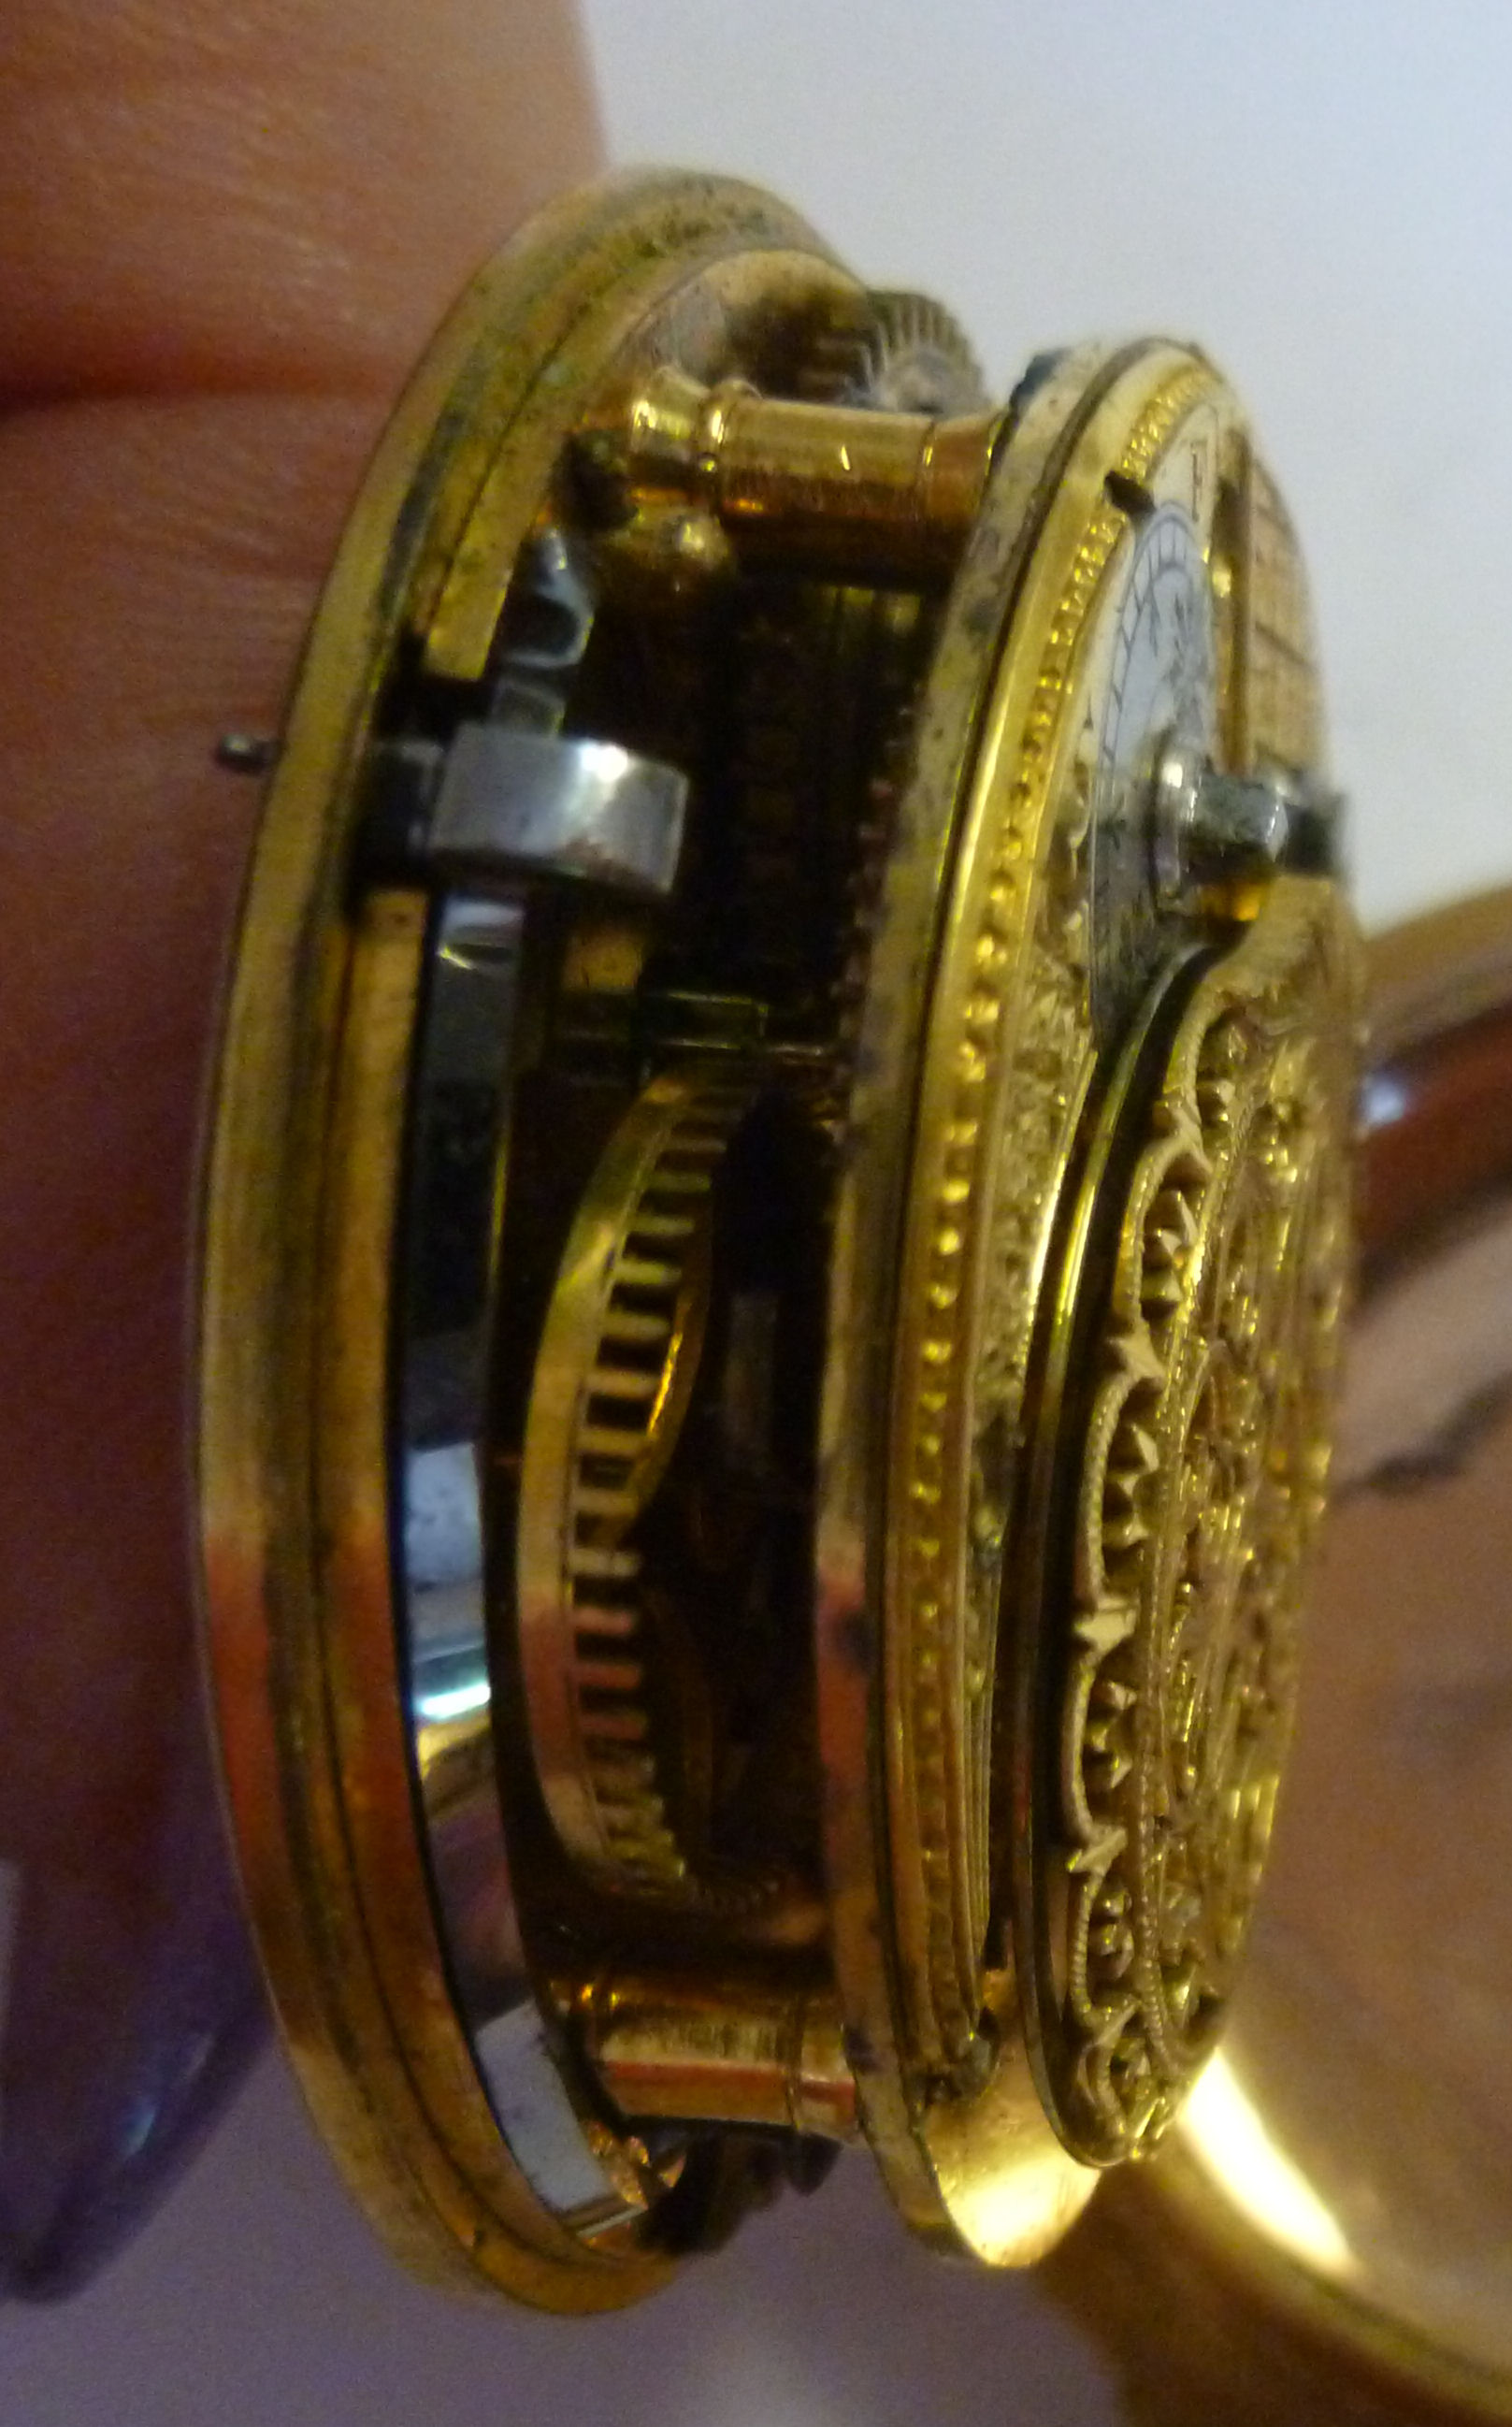 An early 19thC engraved and chased gilt metal cased pocket watch, the fusee movement inscribed Ja. - Image 6 of 7